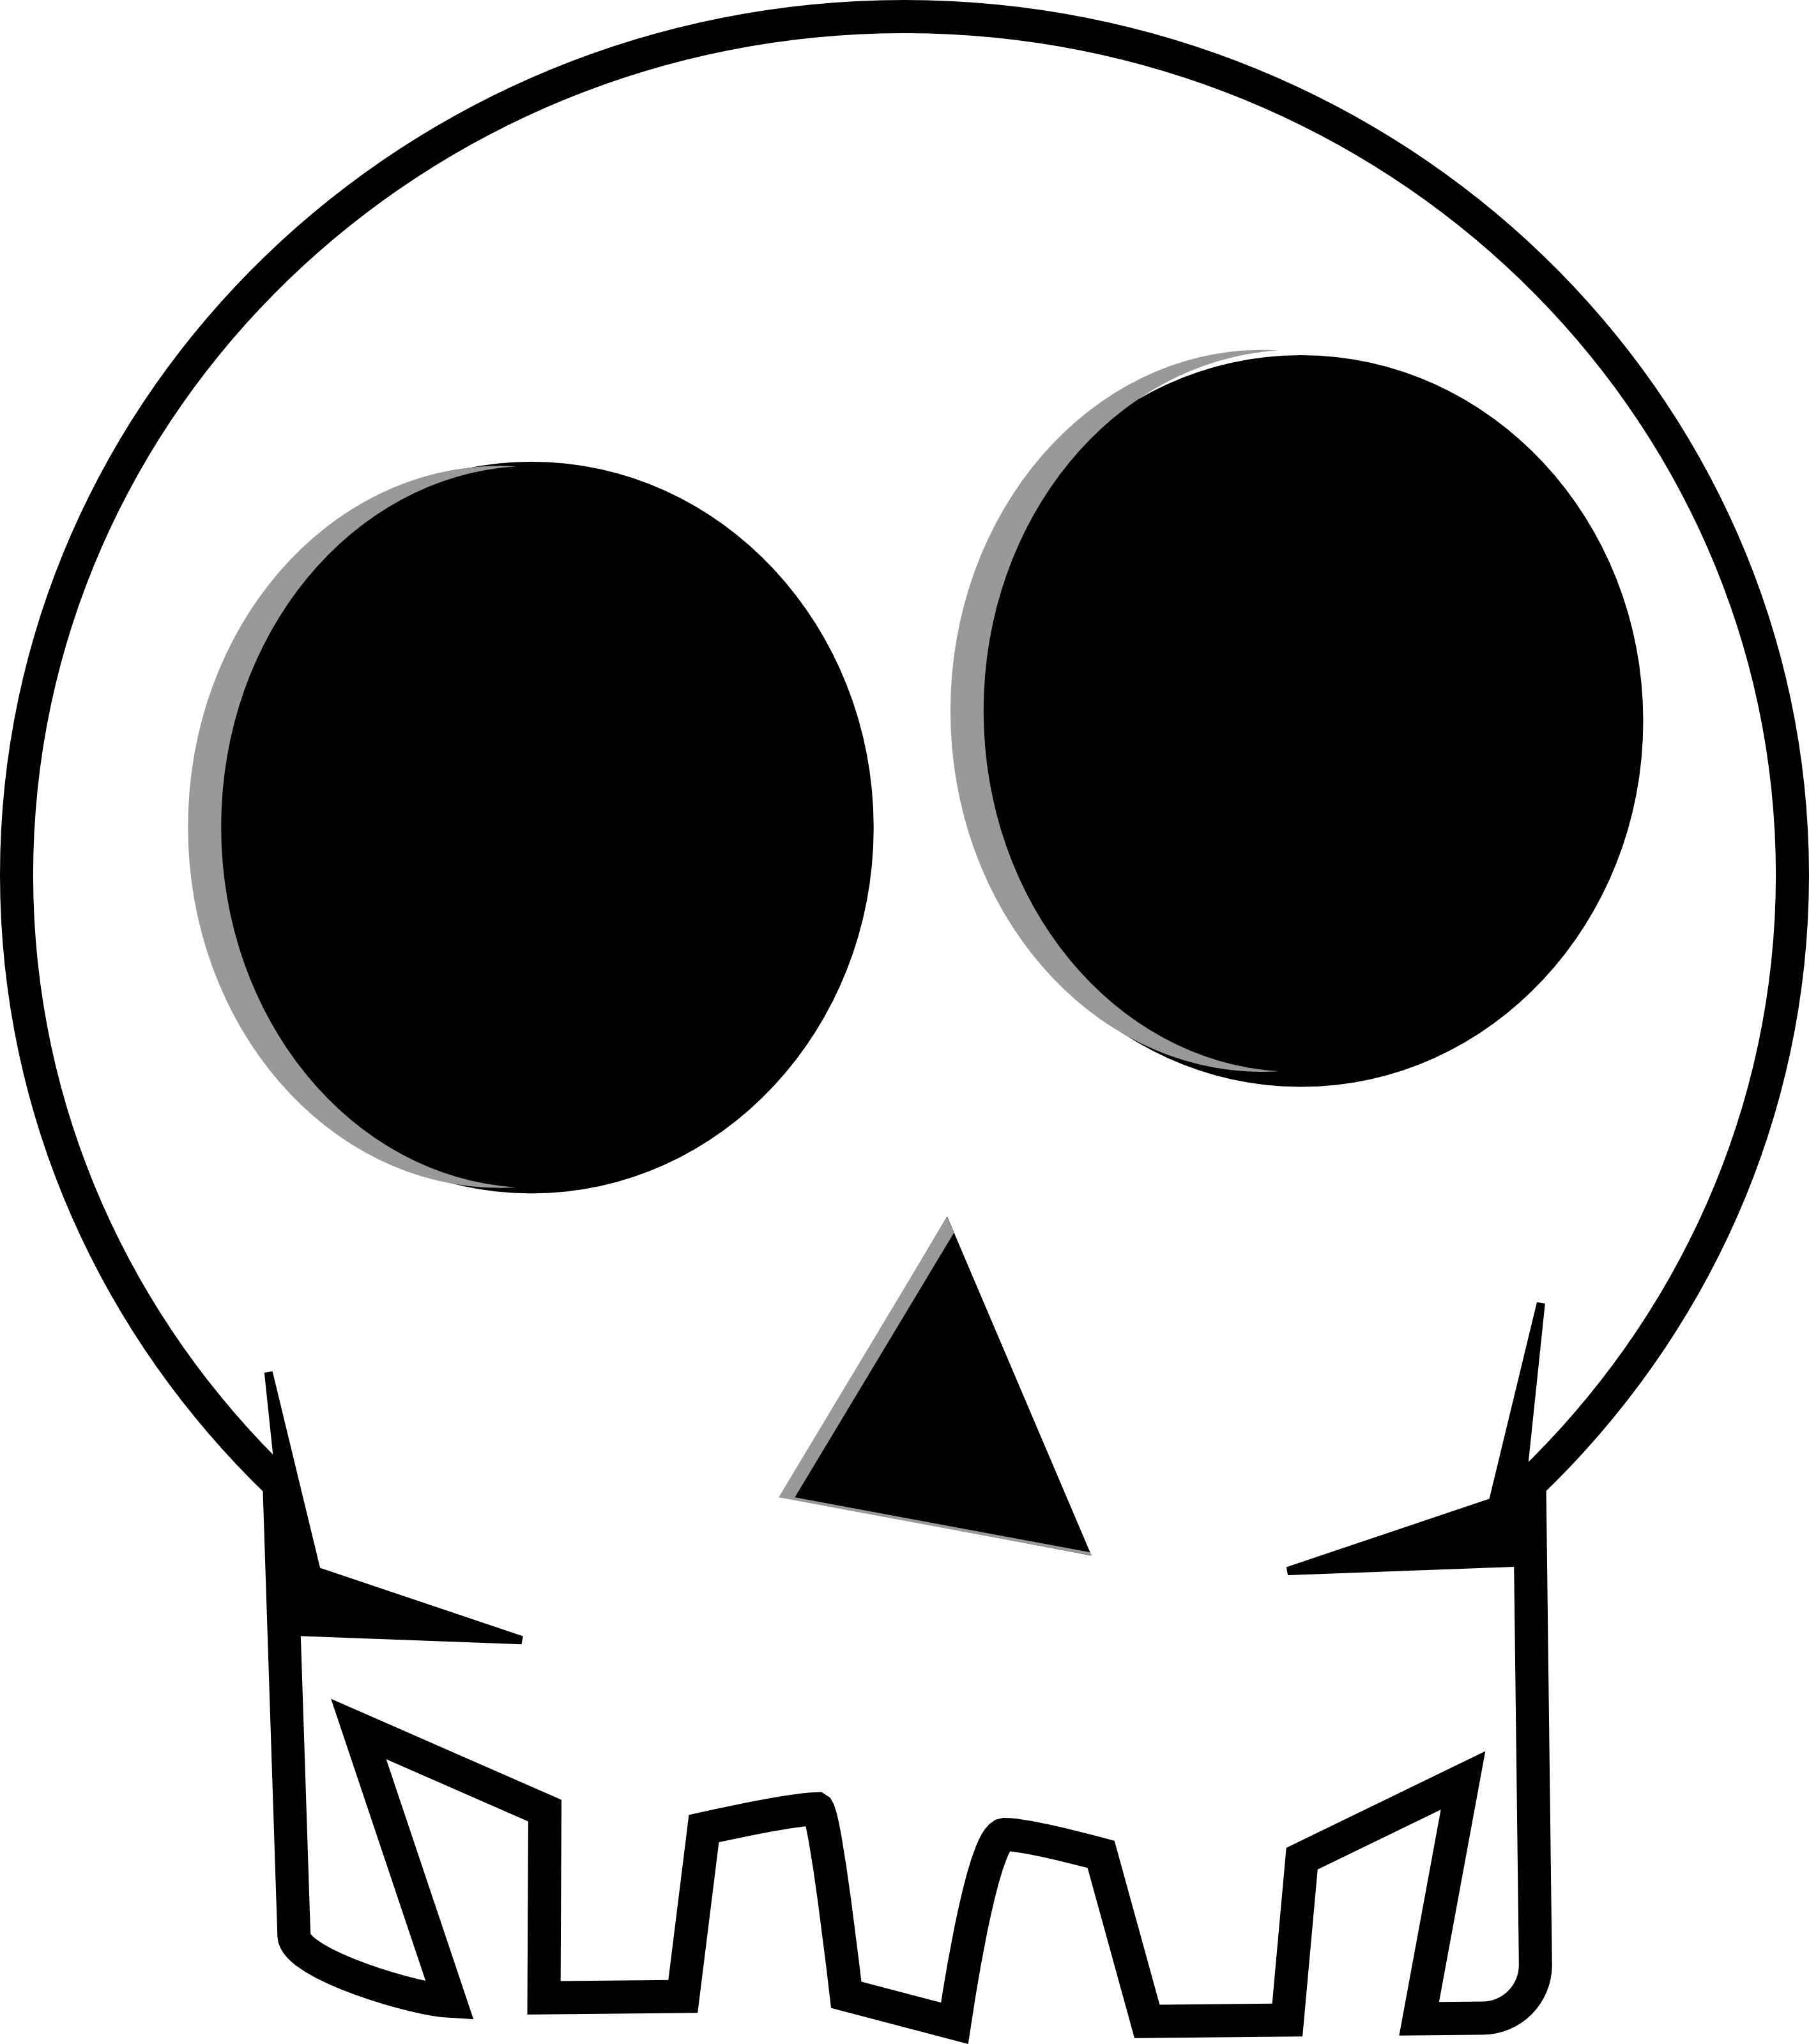 Skull Clip Art Background Clipart Panda Free Clipart Images